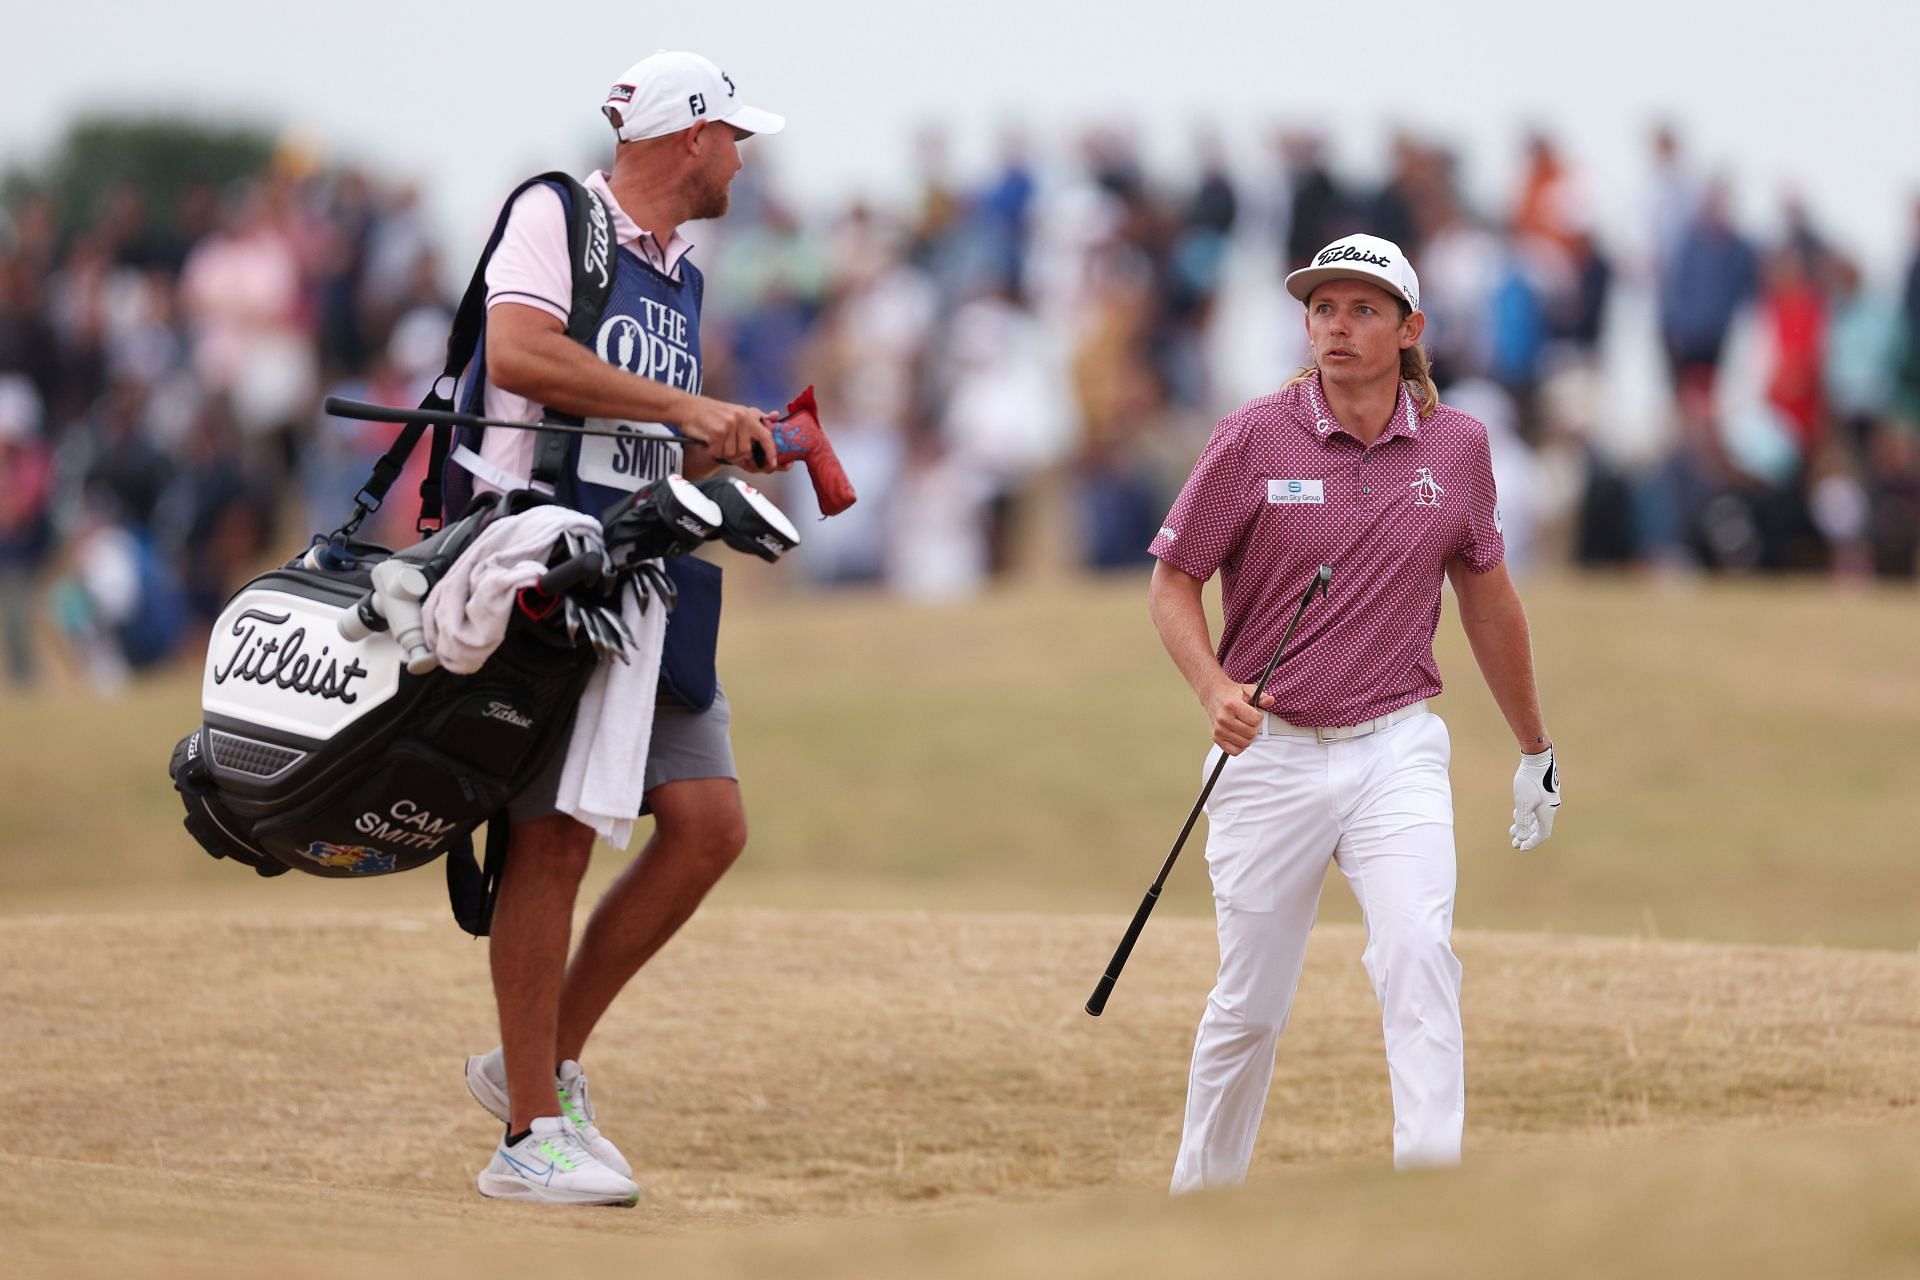 Cameron Smith and Sam Pinfold at The 150th Open - Day Four (Image via Harry How/Getty Images)